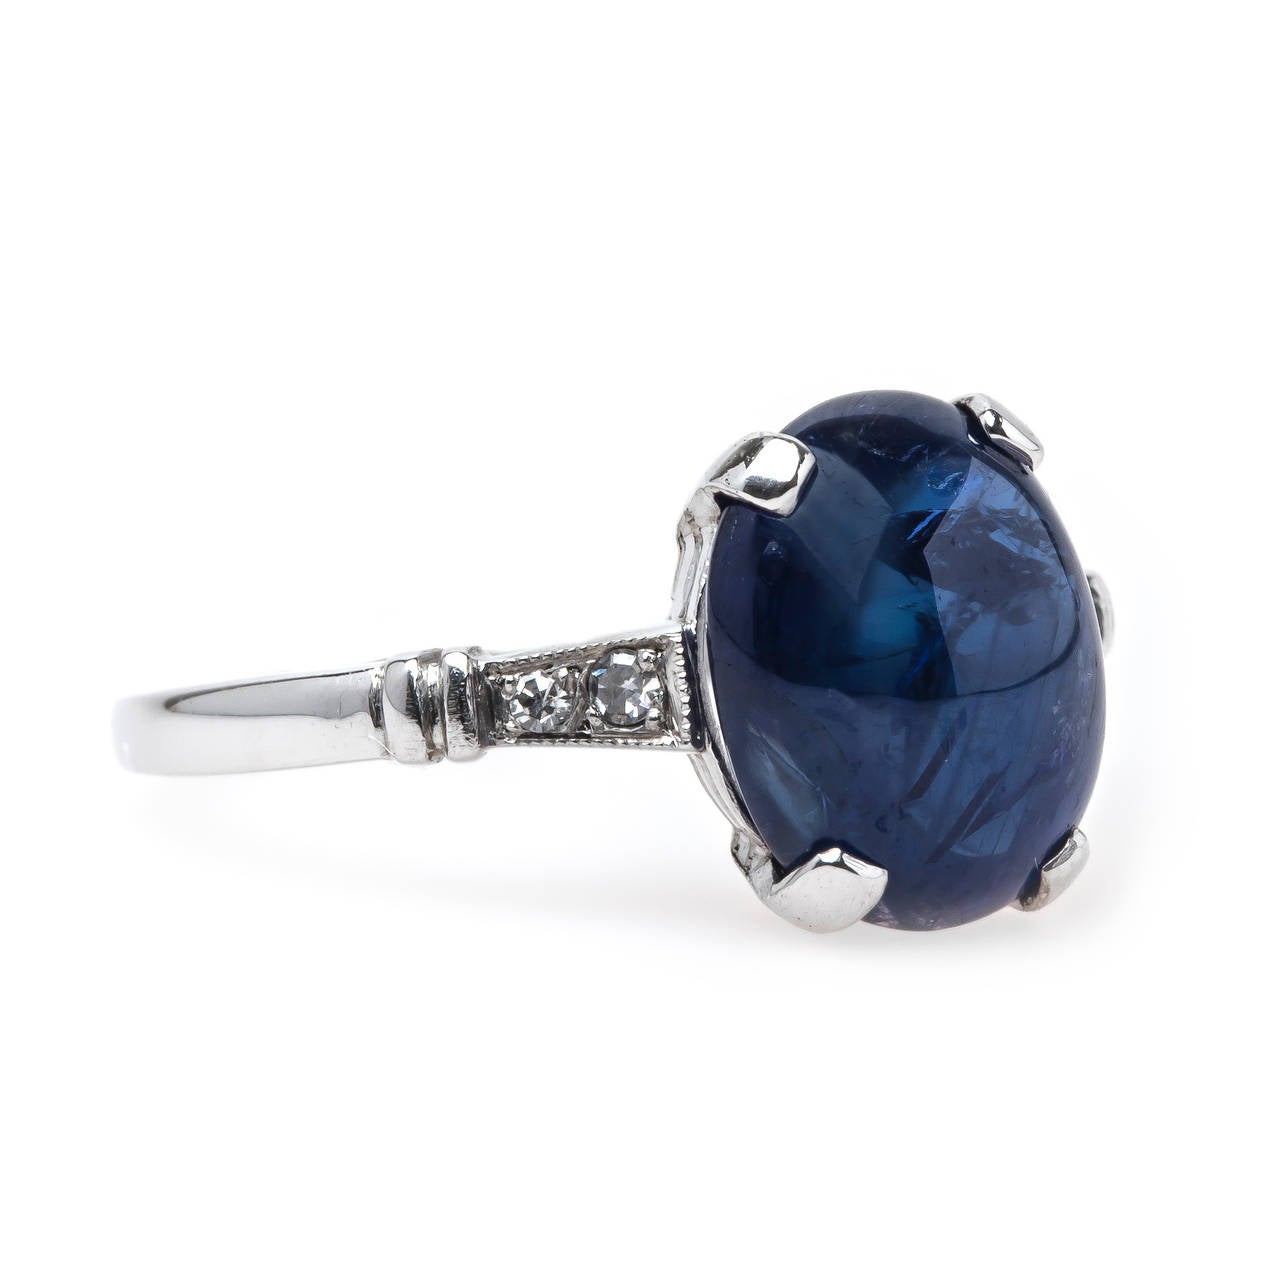 Gulfhaven is a timeless Late Art Deco (circa 1935) ring made from platinum featuring a deep blue natural Oval Cabochon sapphire weighing exactly 4.68cts. This midnight blue sapphire rests in a handmade exemplary Art Deco four-prong setting flanked